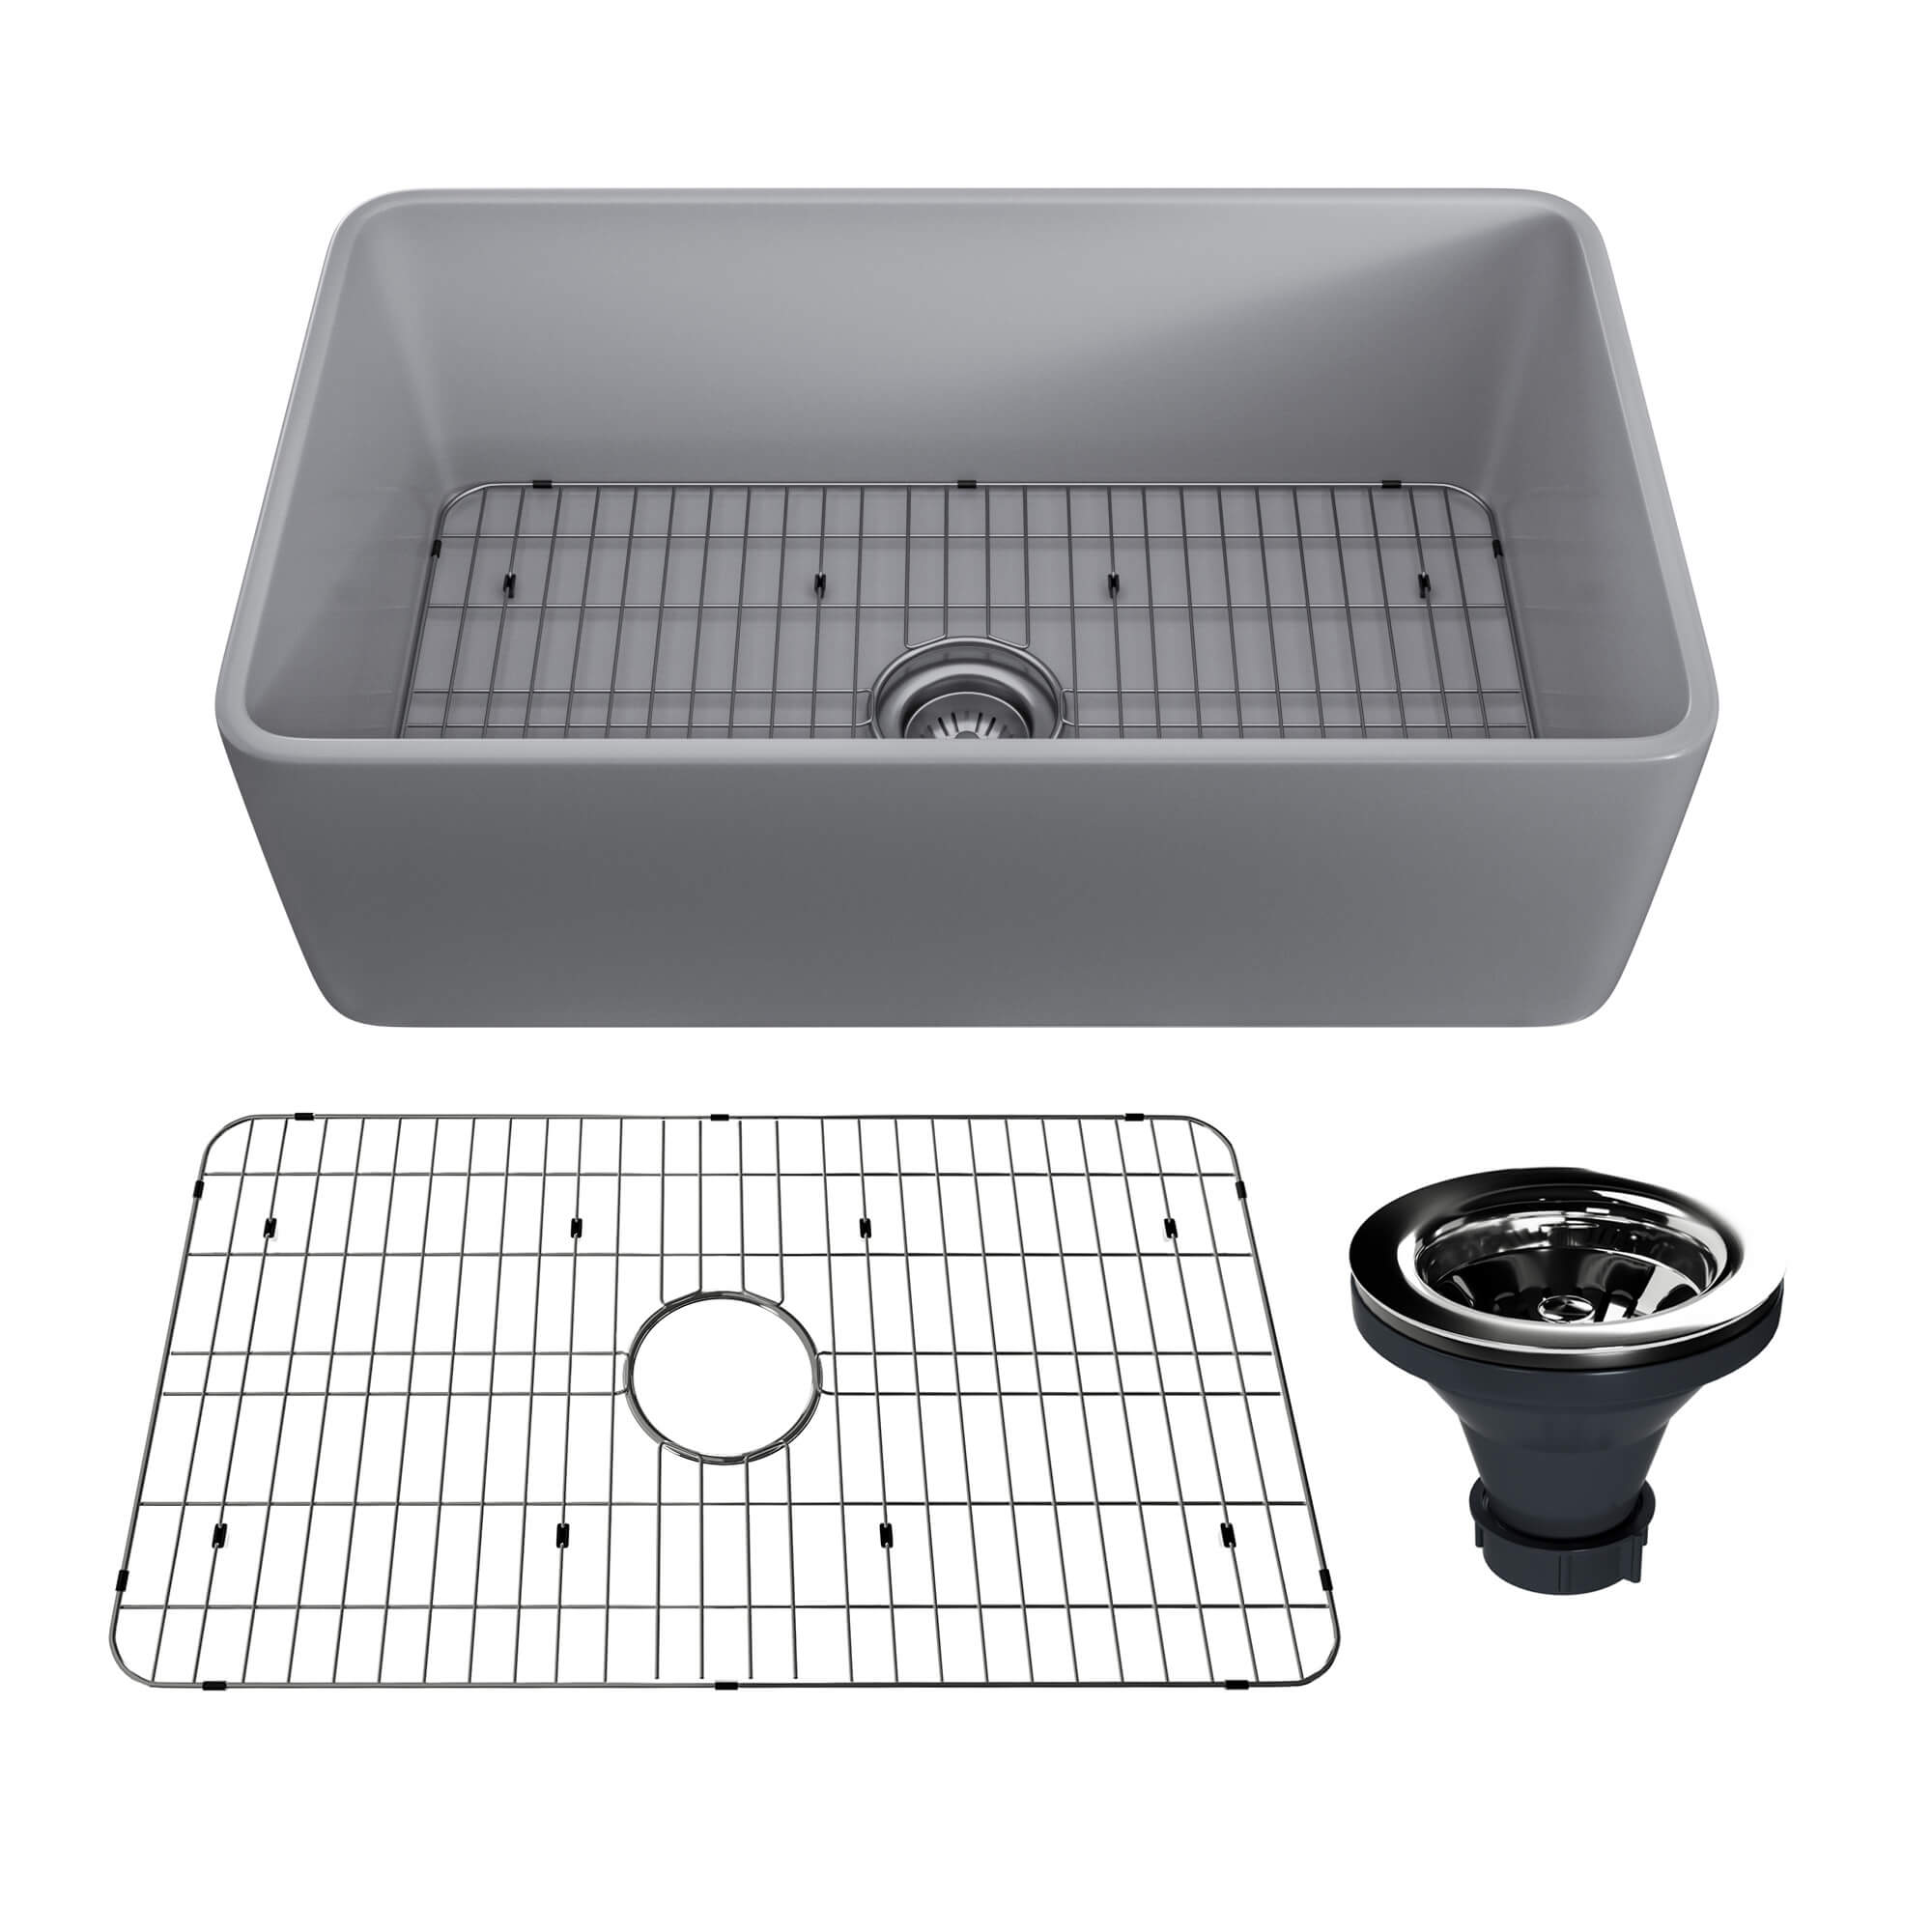 HOROW Fireclay 30 in. L x 18 in. W Black Single Bowl Farmhouse Apron  Kitchen Sink with Grid and Strainer HR-3018B - The Home Depot